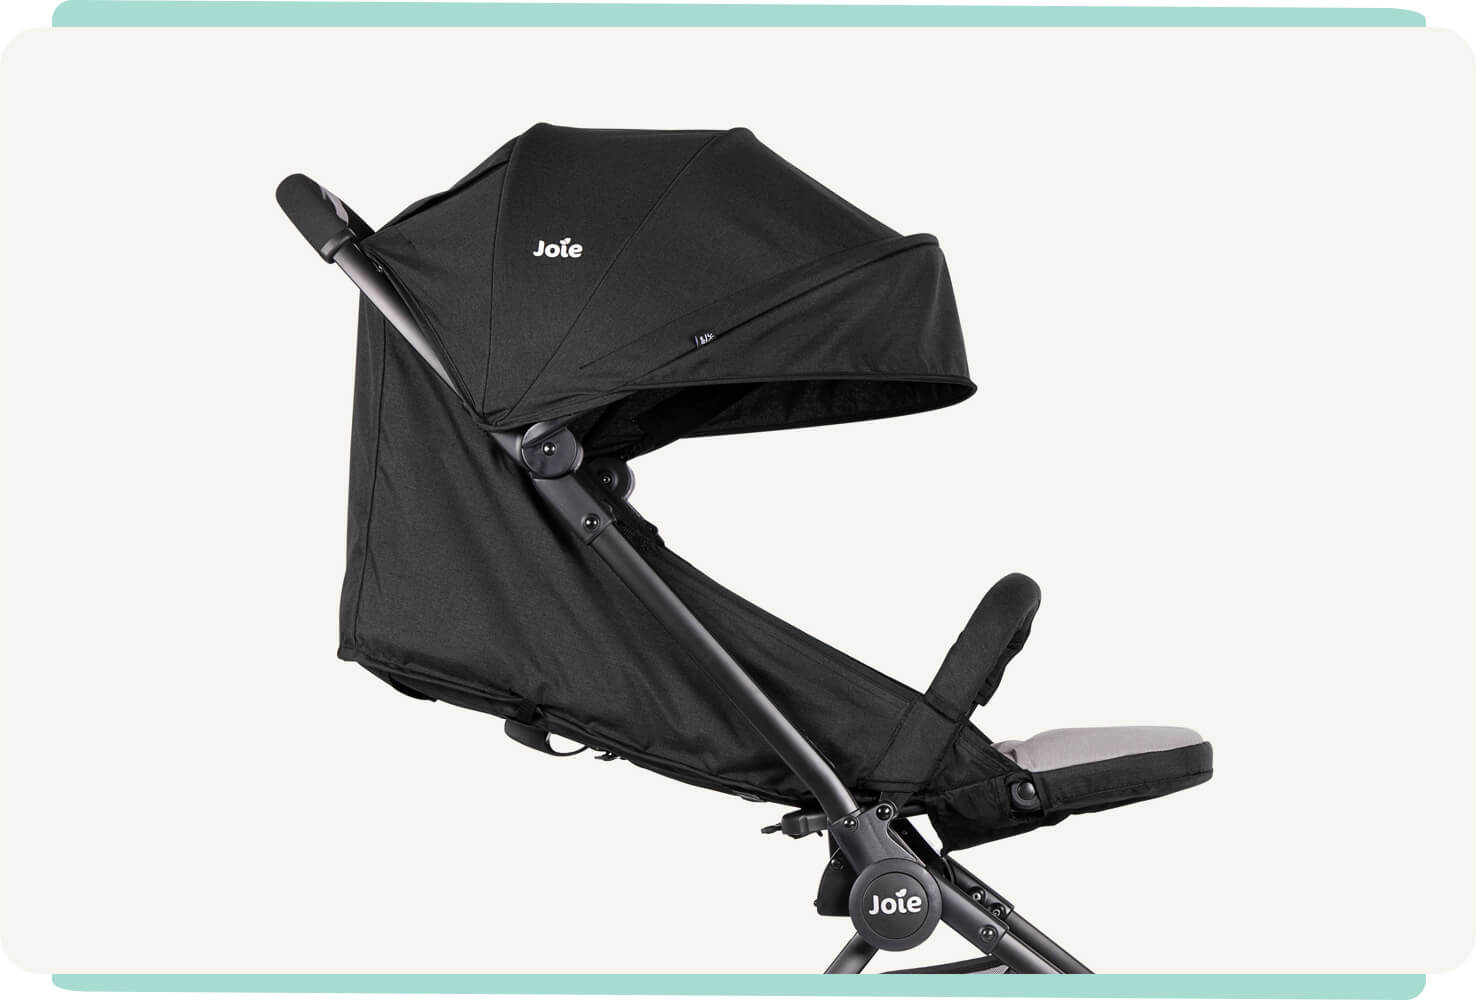  Joie pact pushchair has a comfortable reclining seat for laid back riding